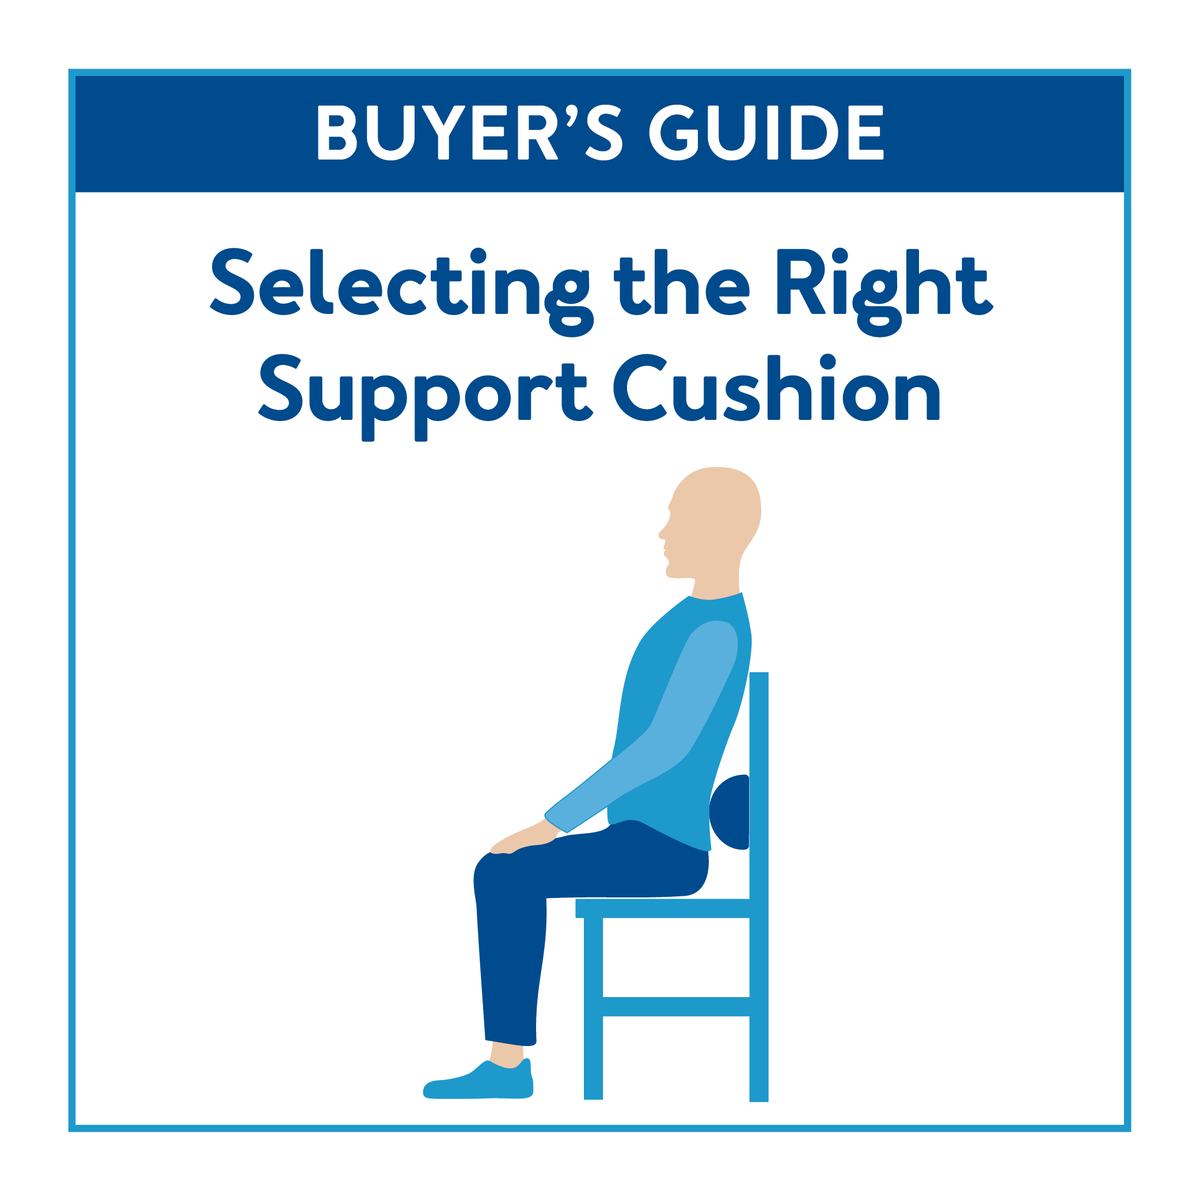  A buyer’s guide cover image with a cartoon person sitting. Text, “Buyer’s Guide: Selecting the Right Support Cushion”